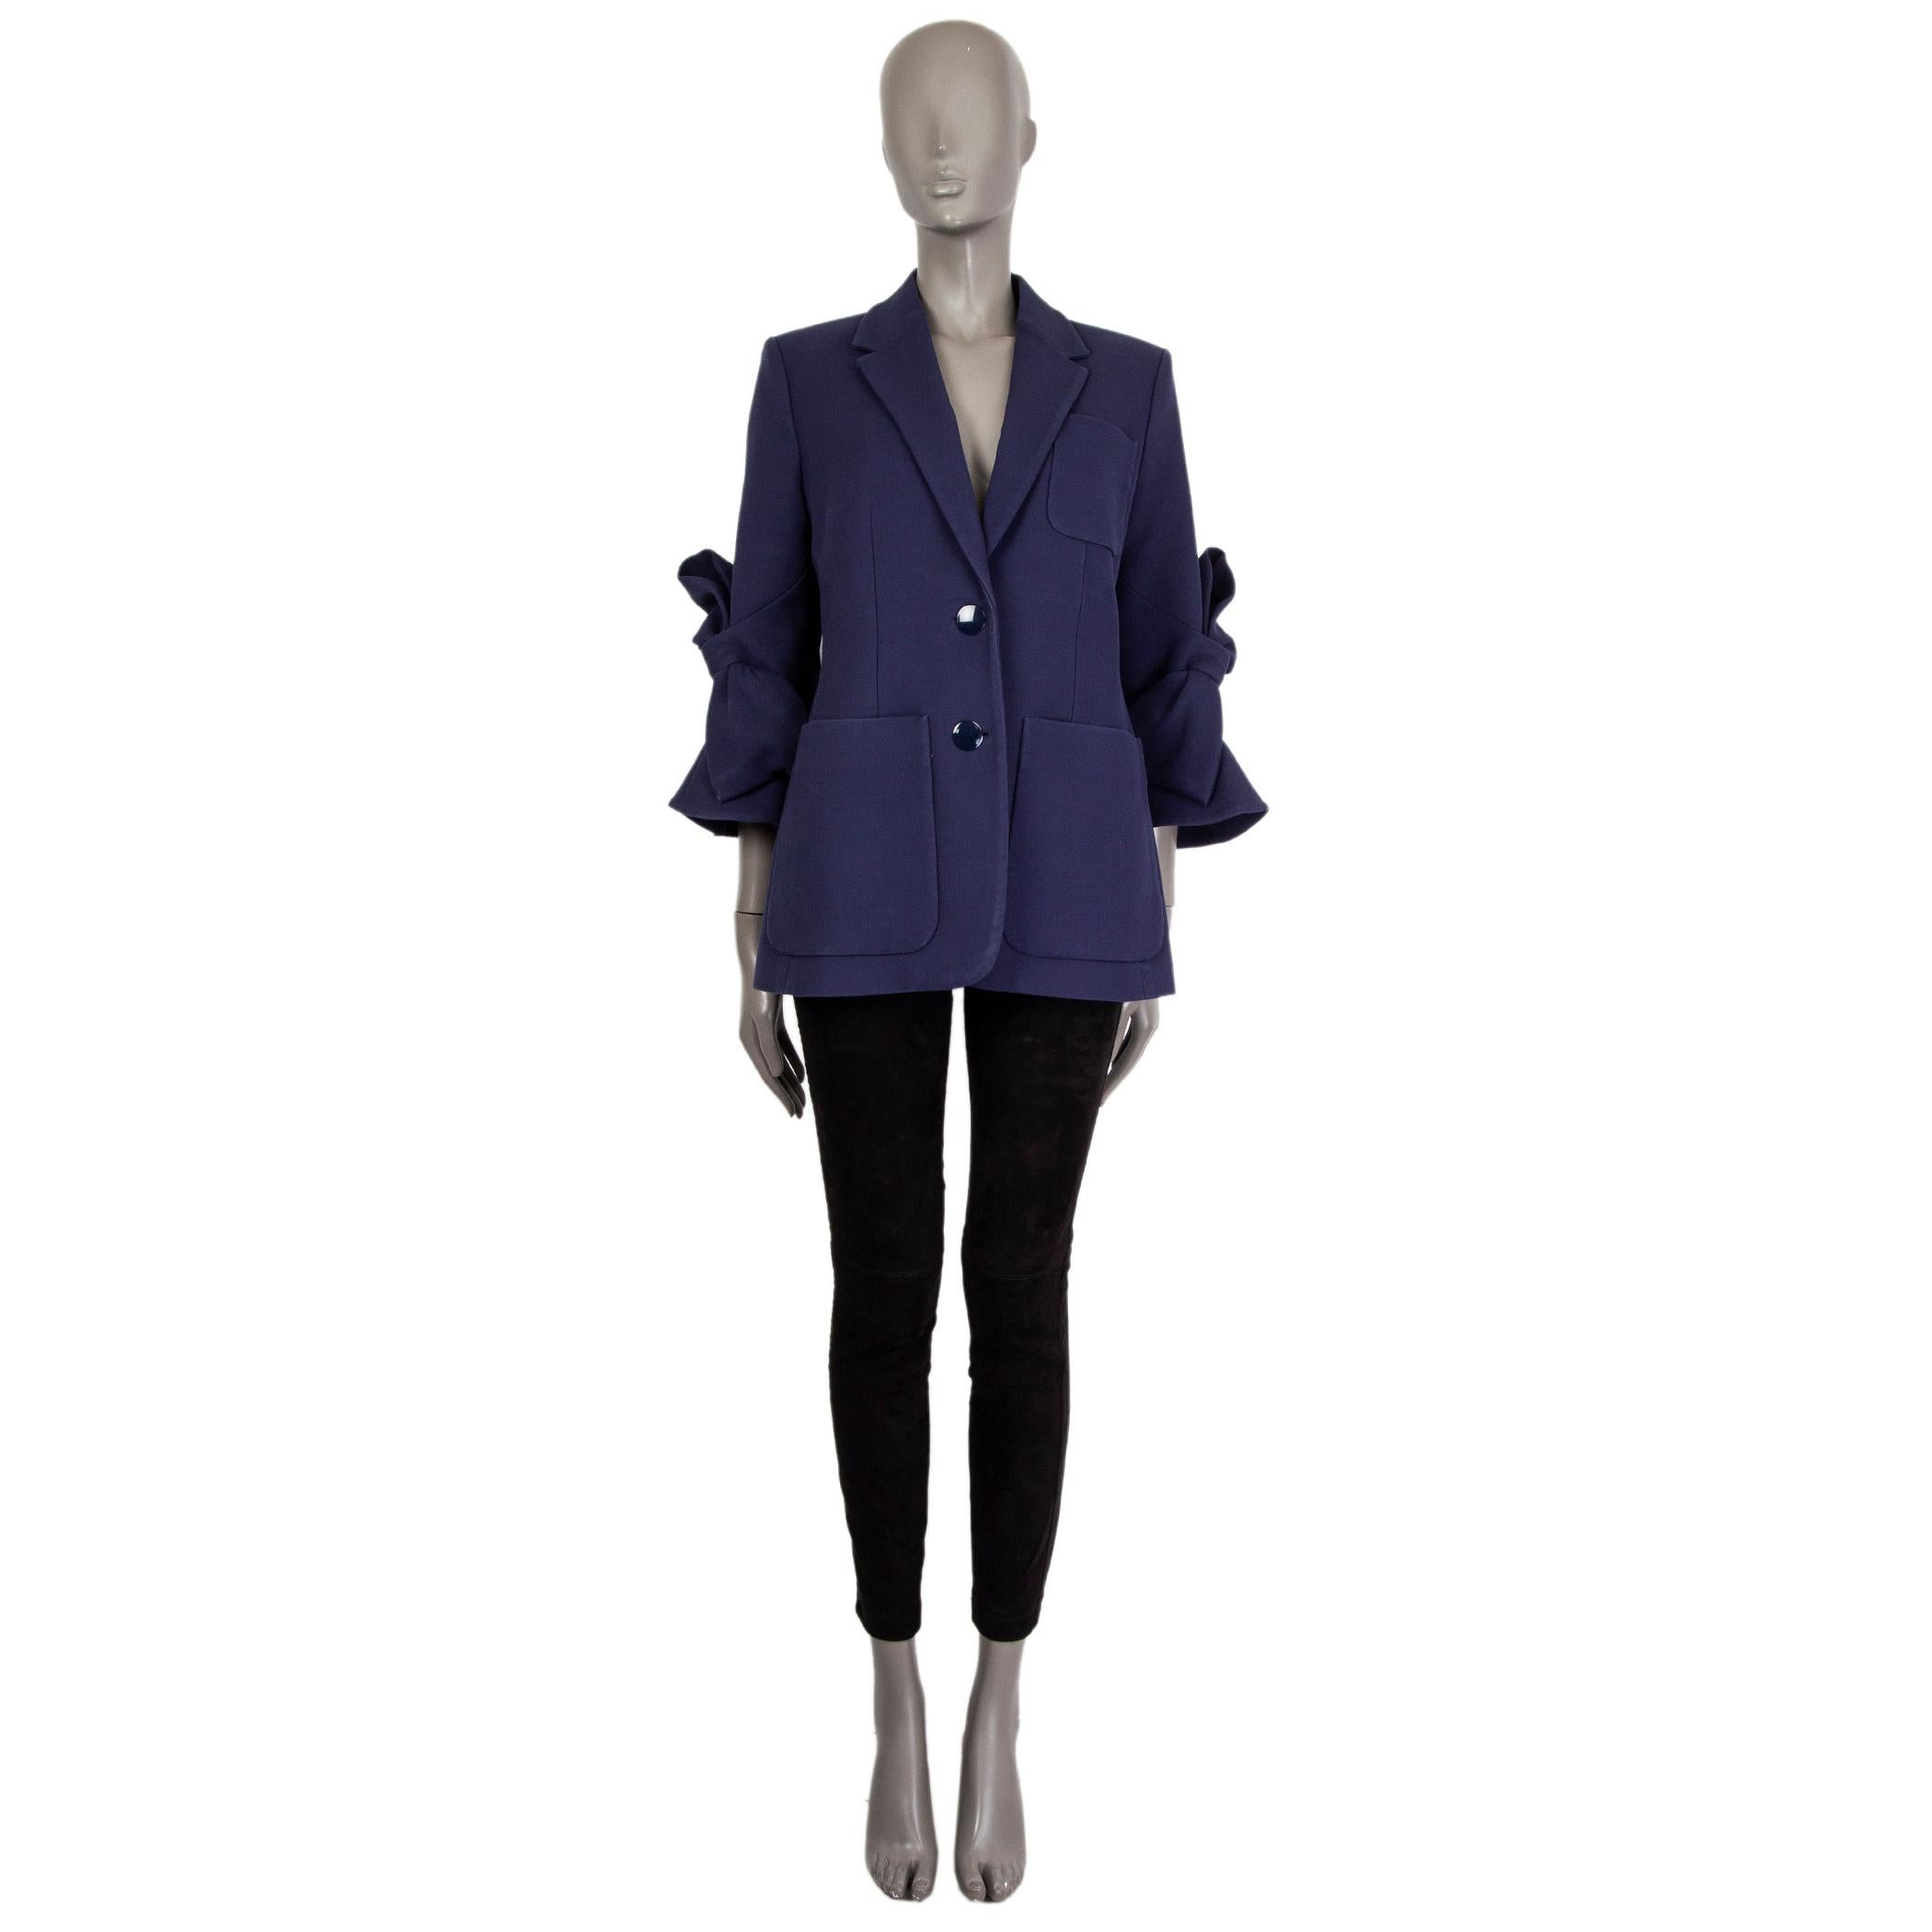 100% authentic Roksanda bow-sleeve blazer in indigo cotton (100'%). With notch collar and three patch pockets on the front. Closes with two flat buttons in indigo enamel on the front. Lined in salmon, pink, olive, and indigo silk (100%). Hss been